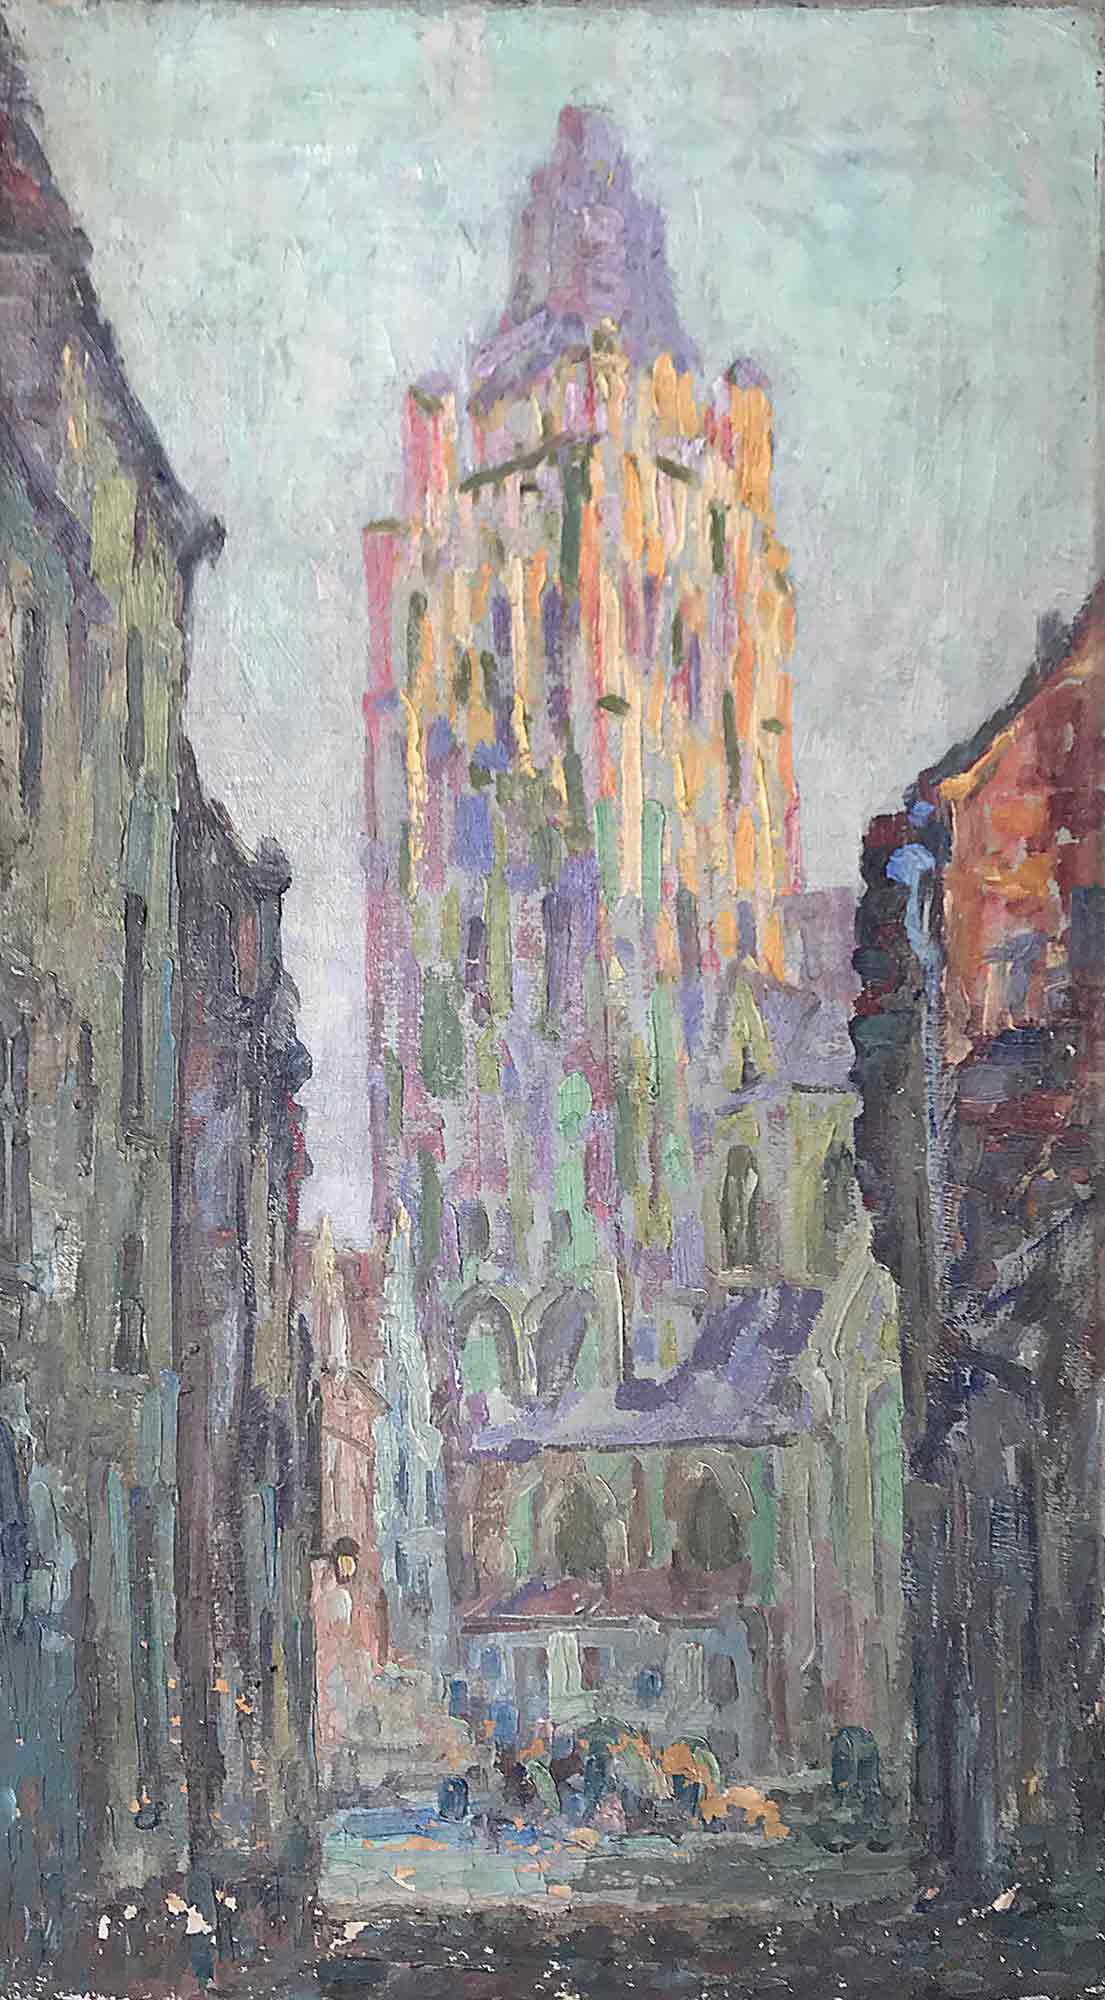 Church Tower - Oil on canvas signed with monogram c. 1900